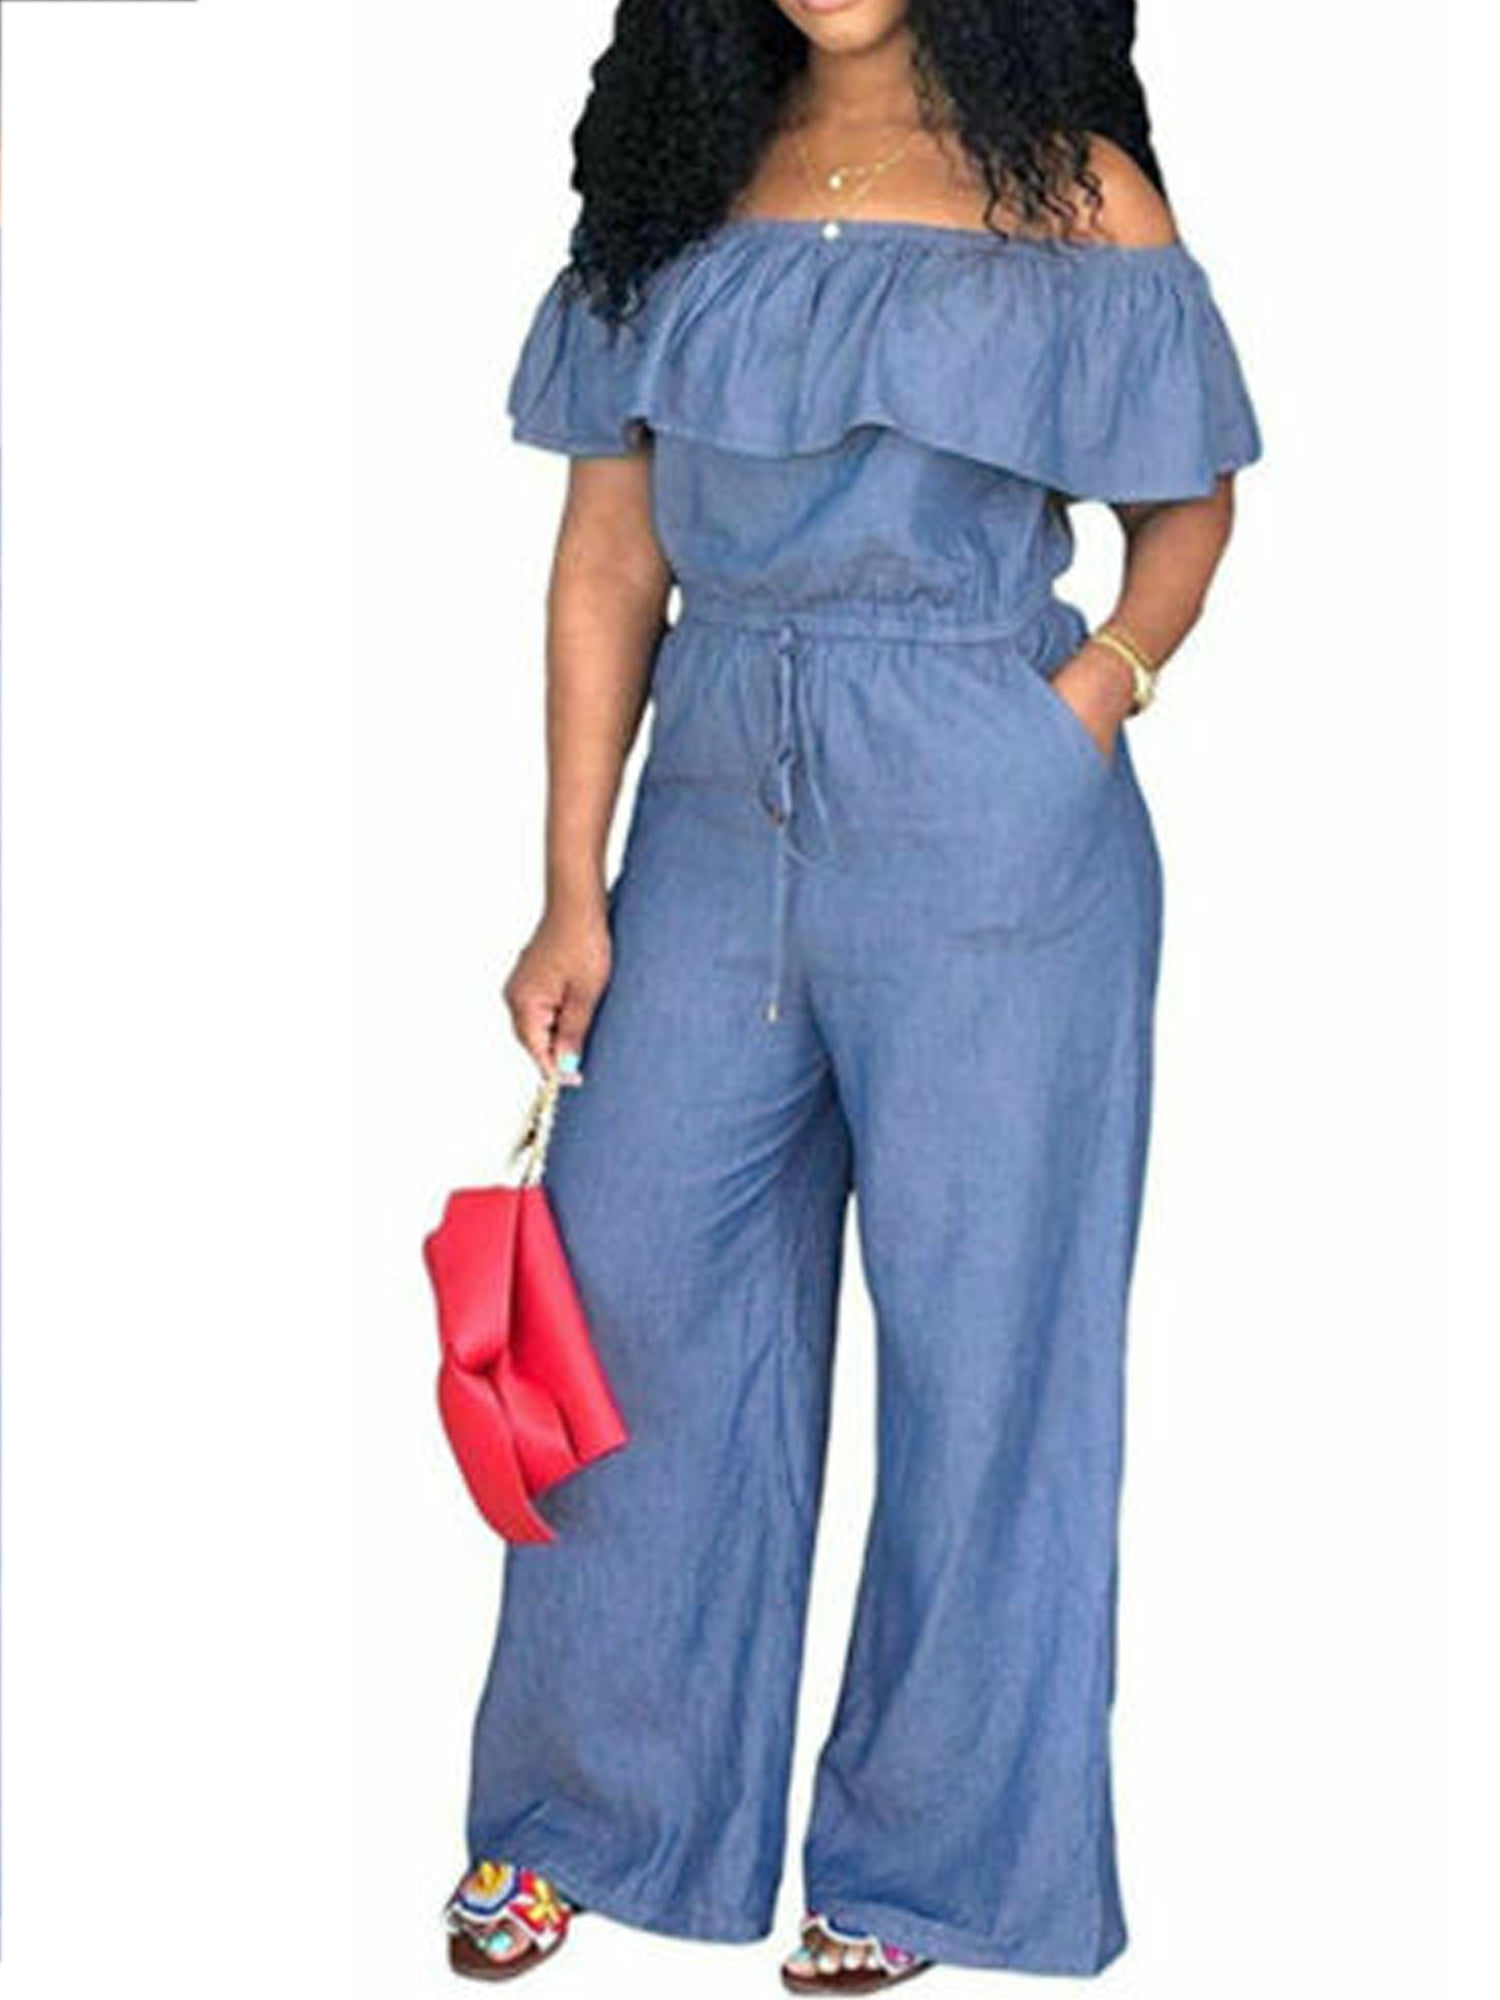 maydaiyar Casual Rompers Womens Jumpsuit Plus Size Denim Overalls Print Flower Holes